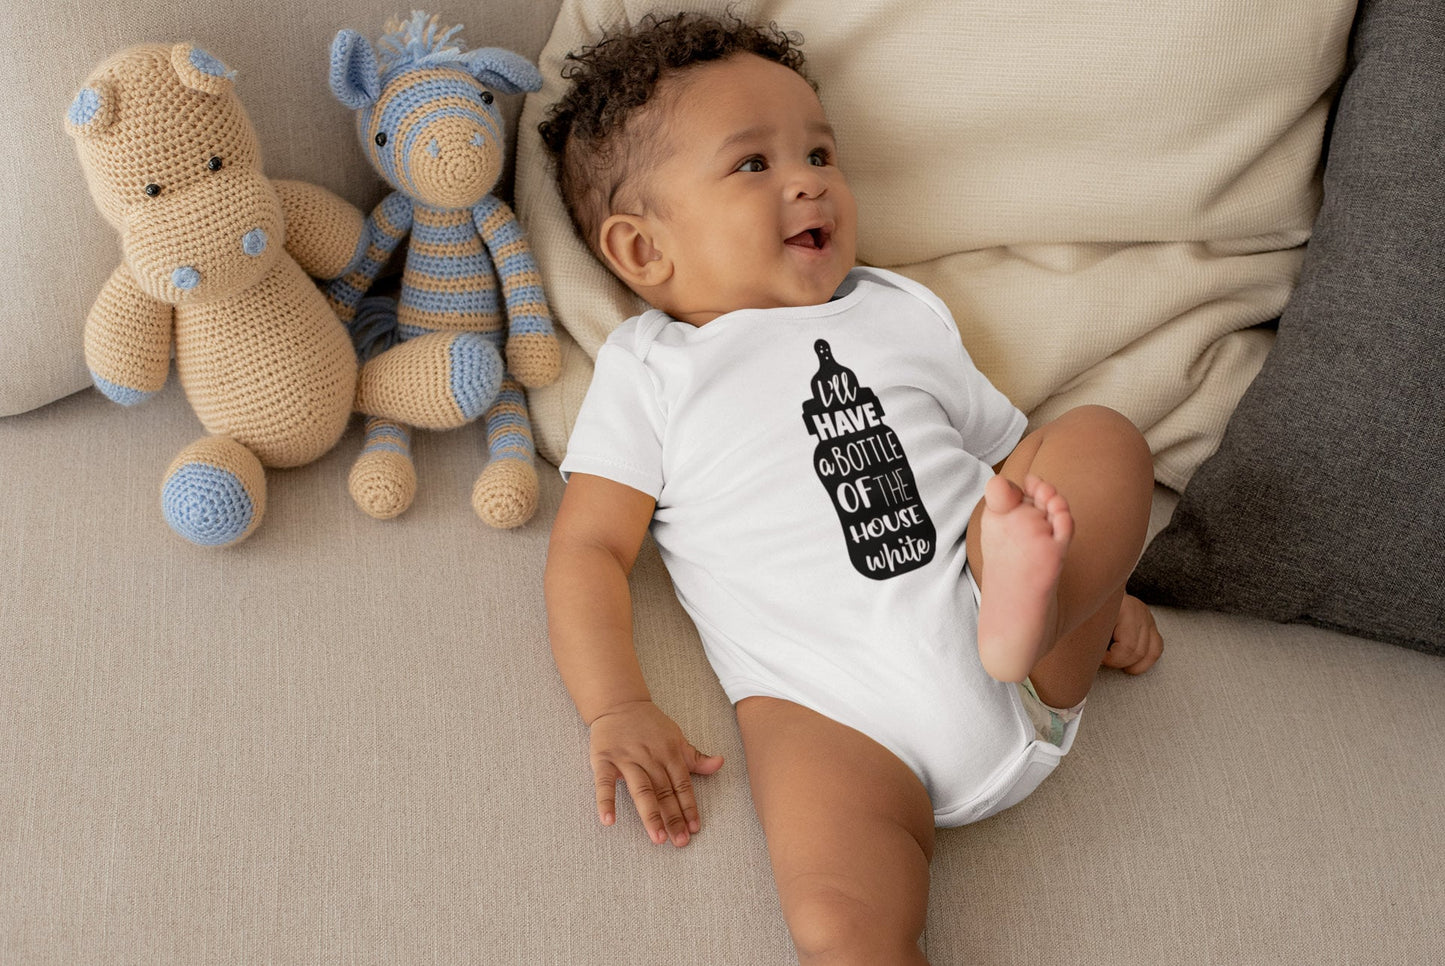 Bottle Of The House White Baby Vest, Baby Grow